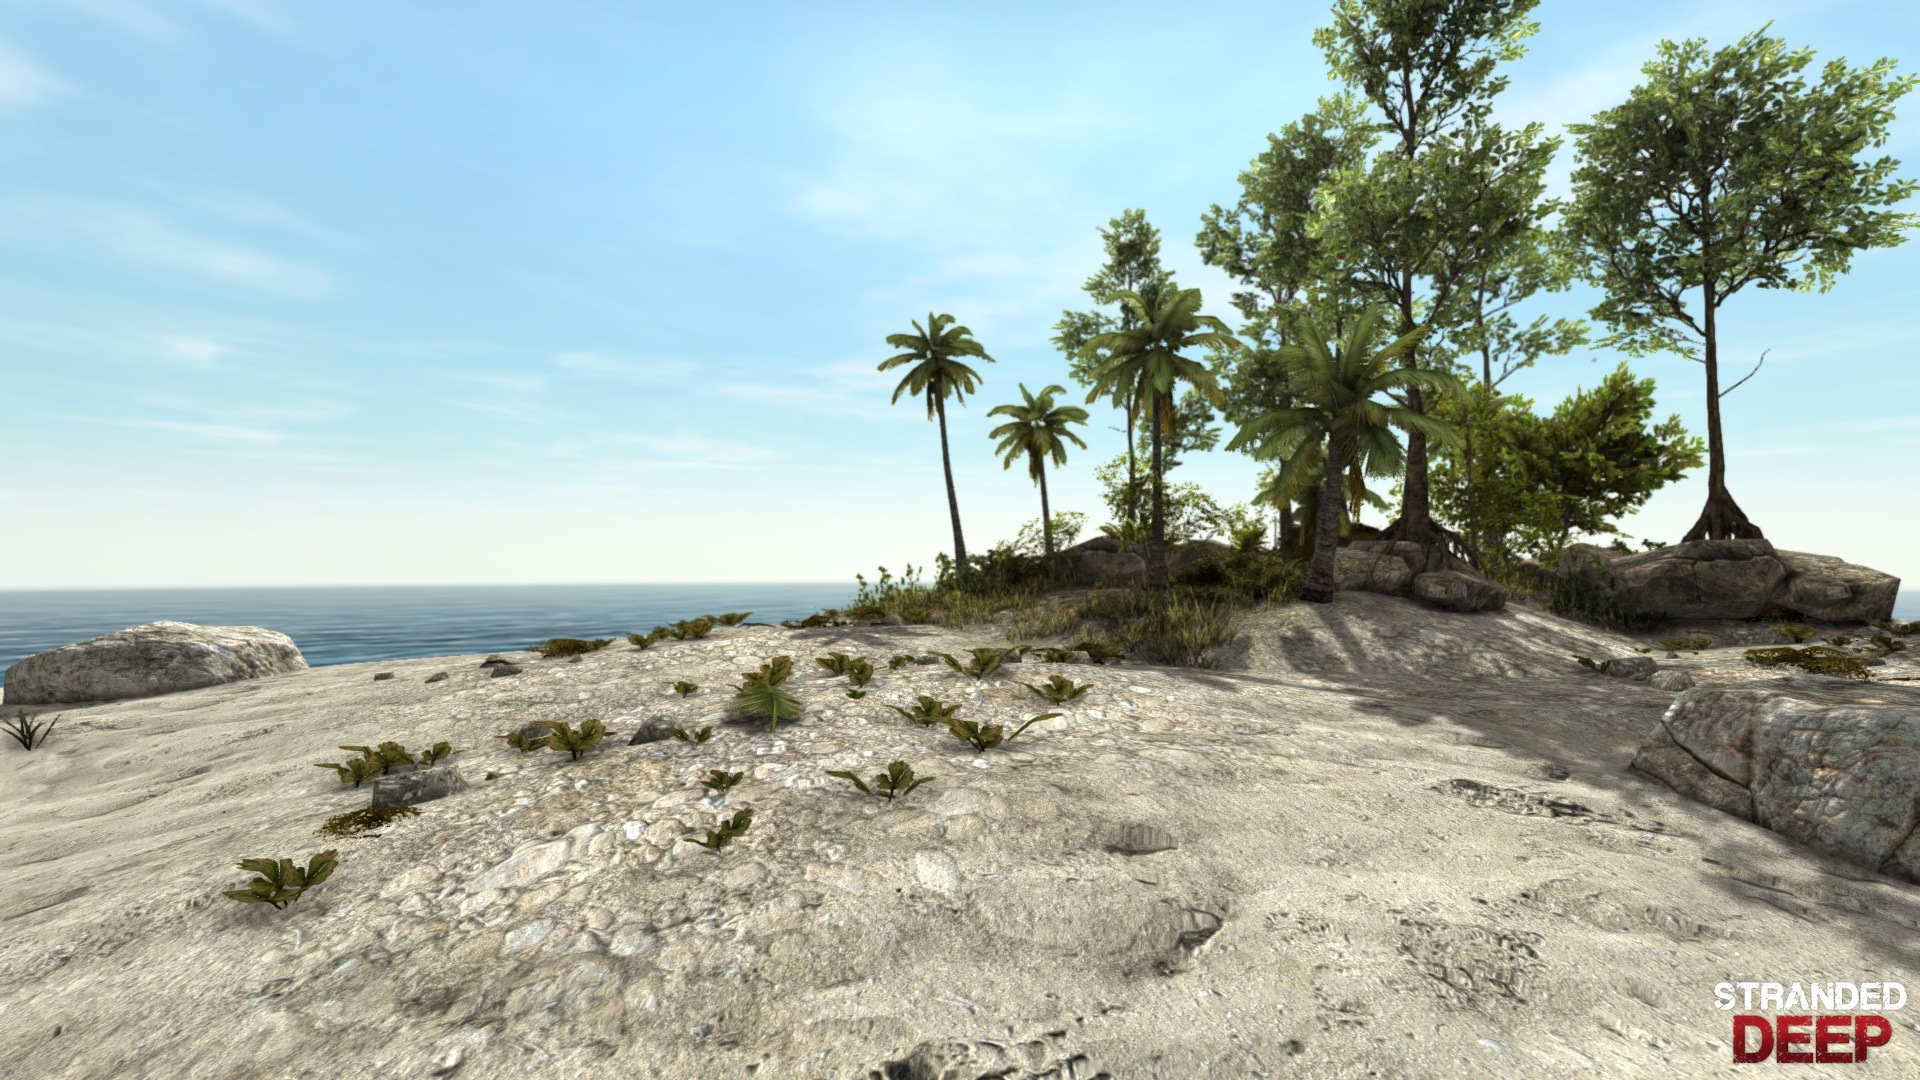 is stranded deep free on steam